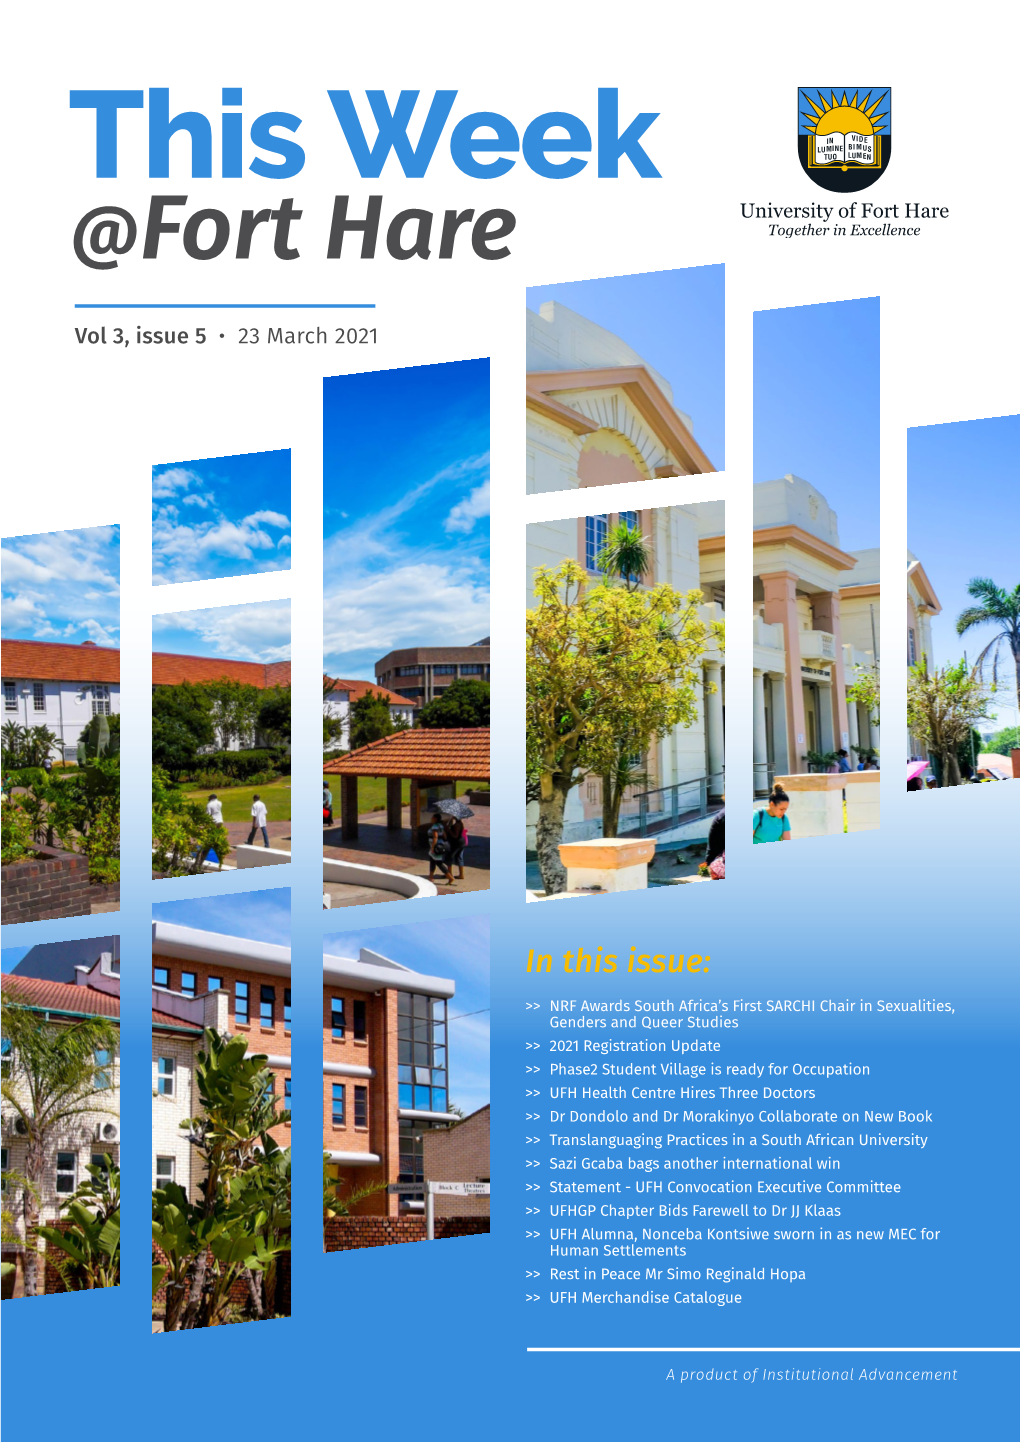 This Week @Fort Hare Vol 3 Issue 5